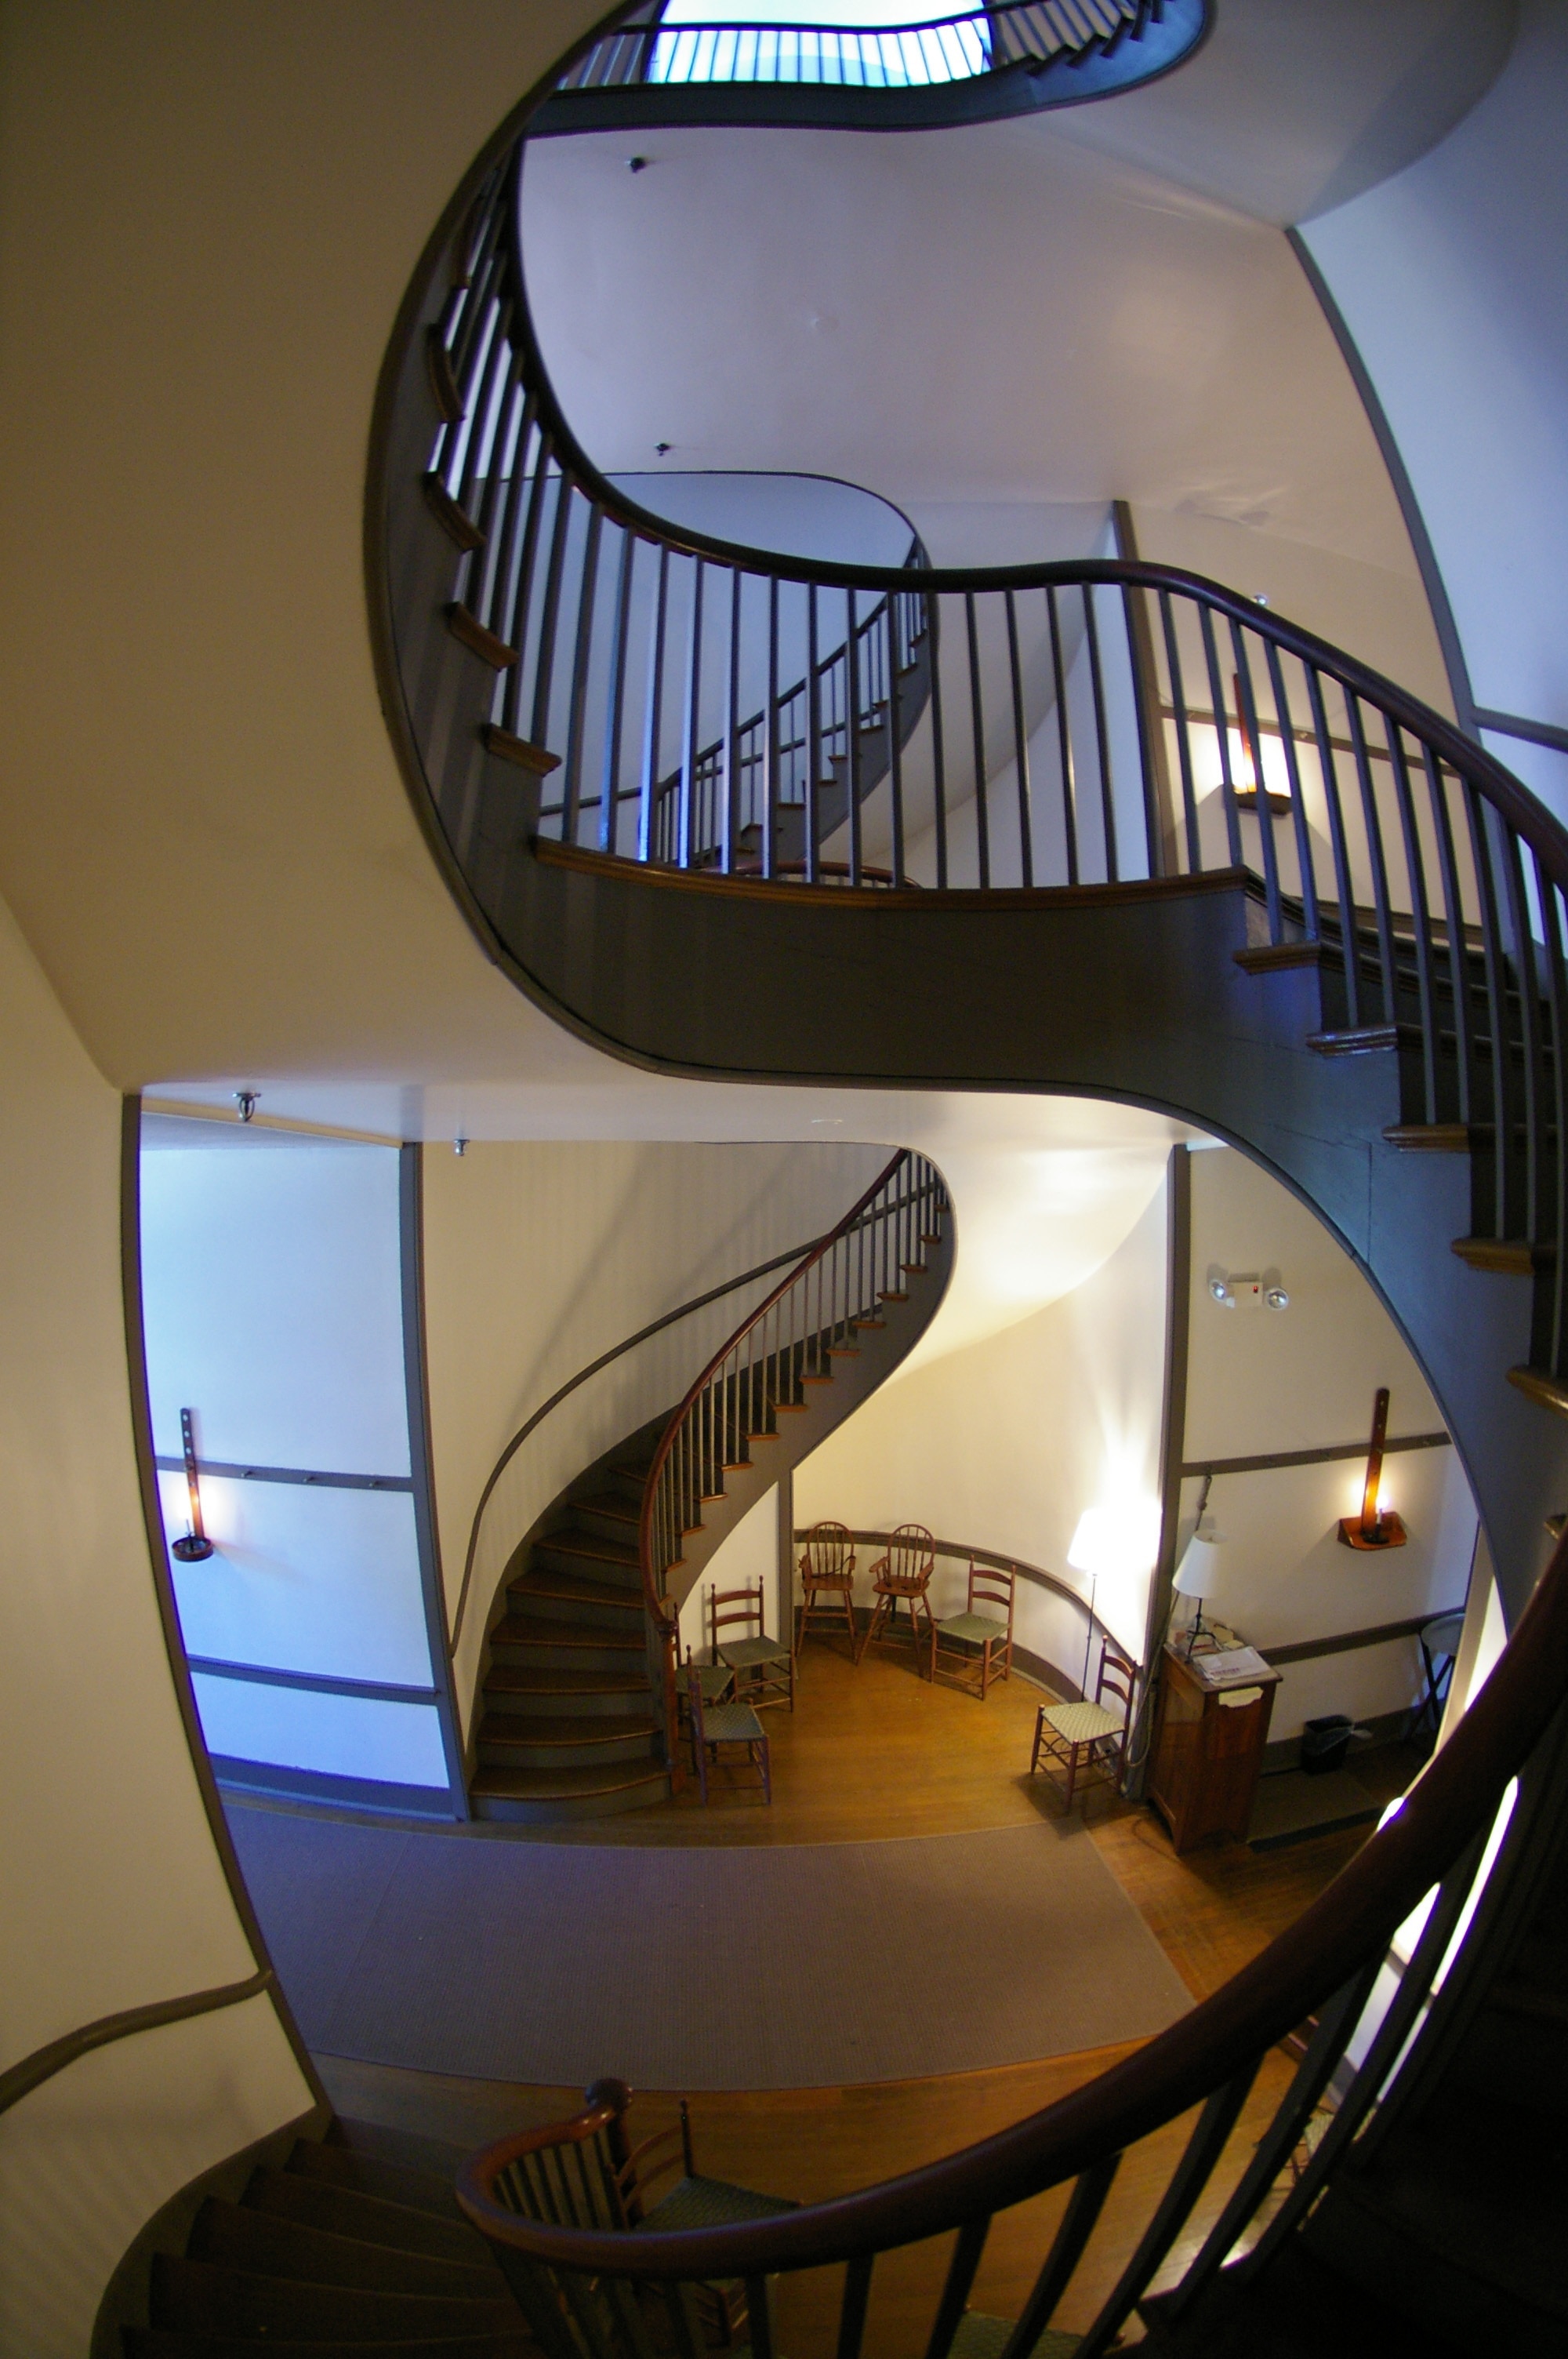 Double spiral staircases built by young Shaker man circa 1840